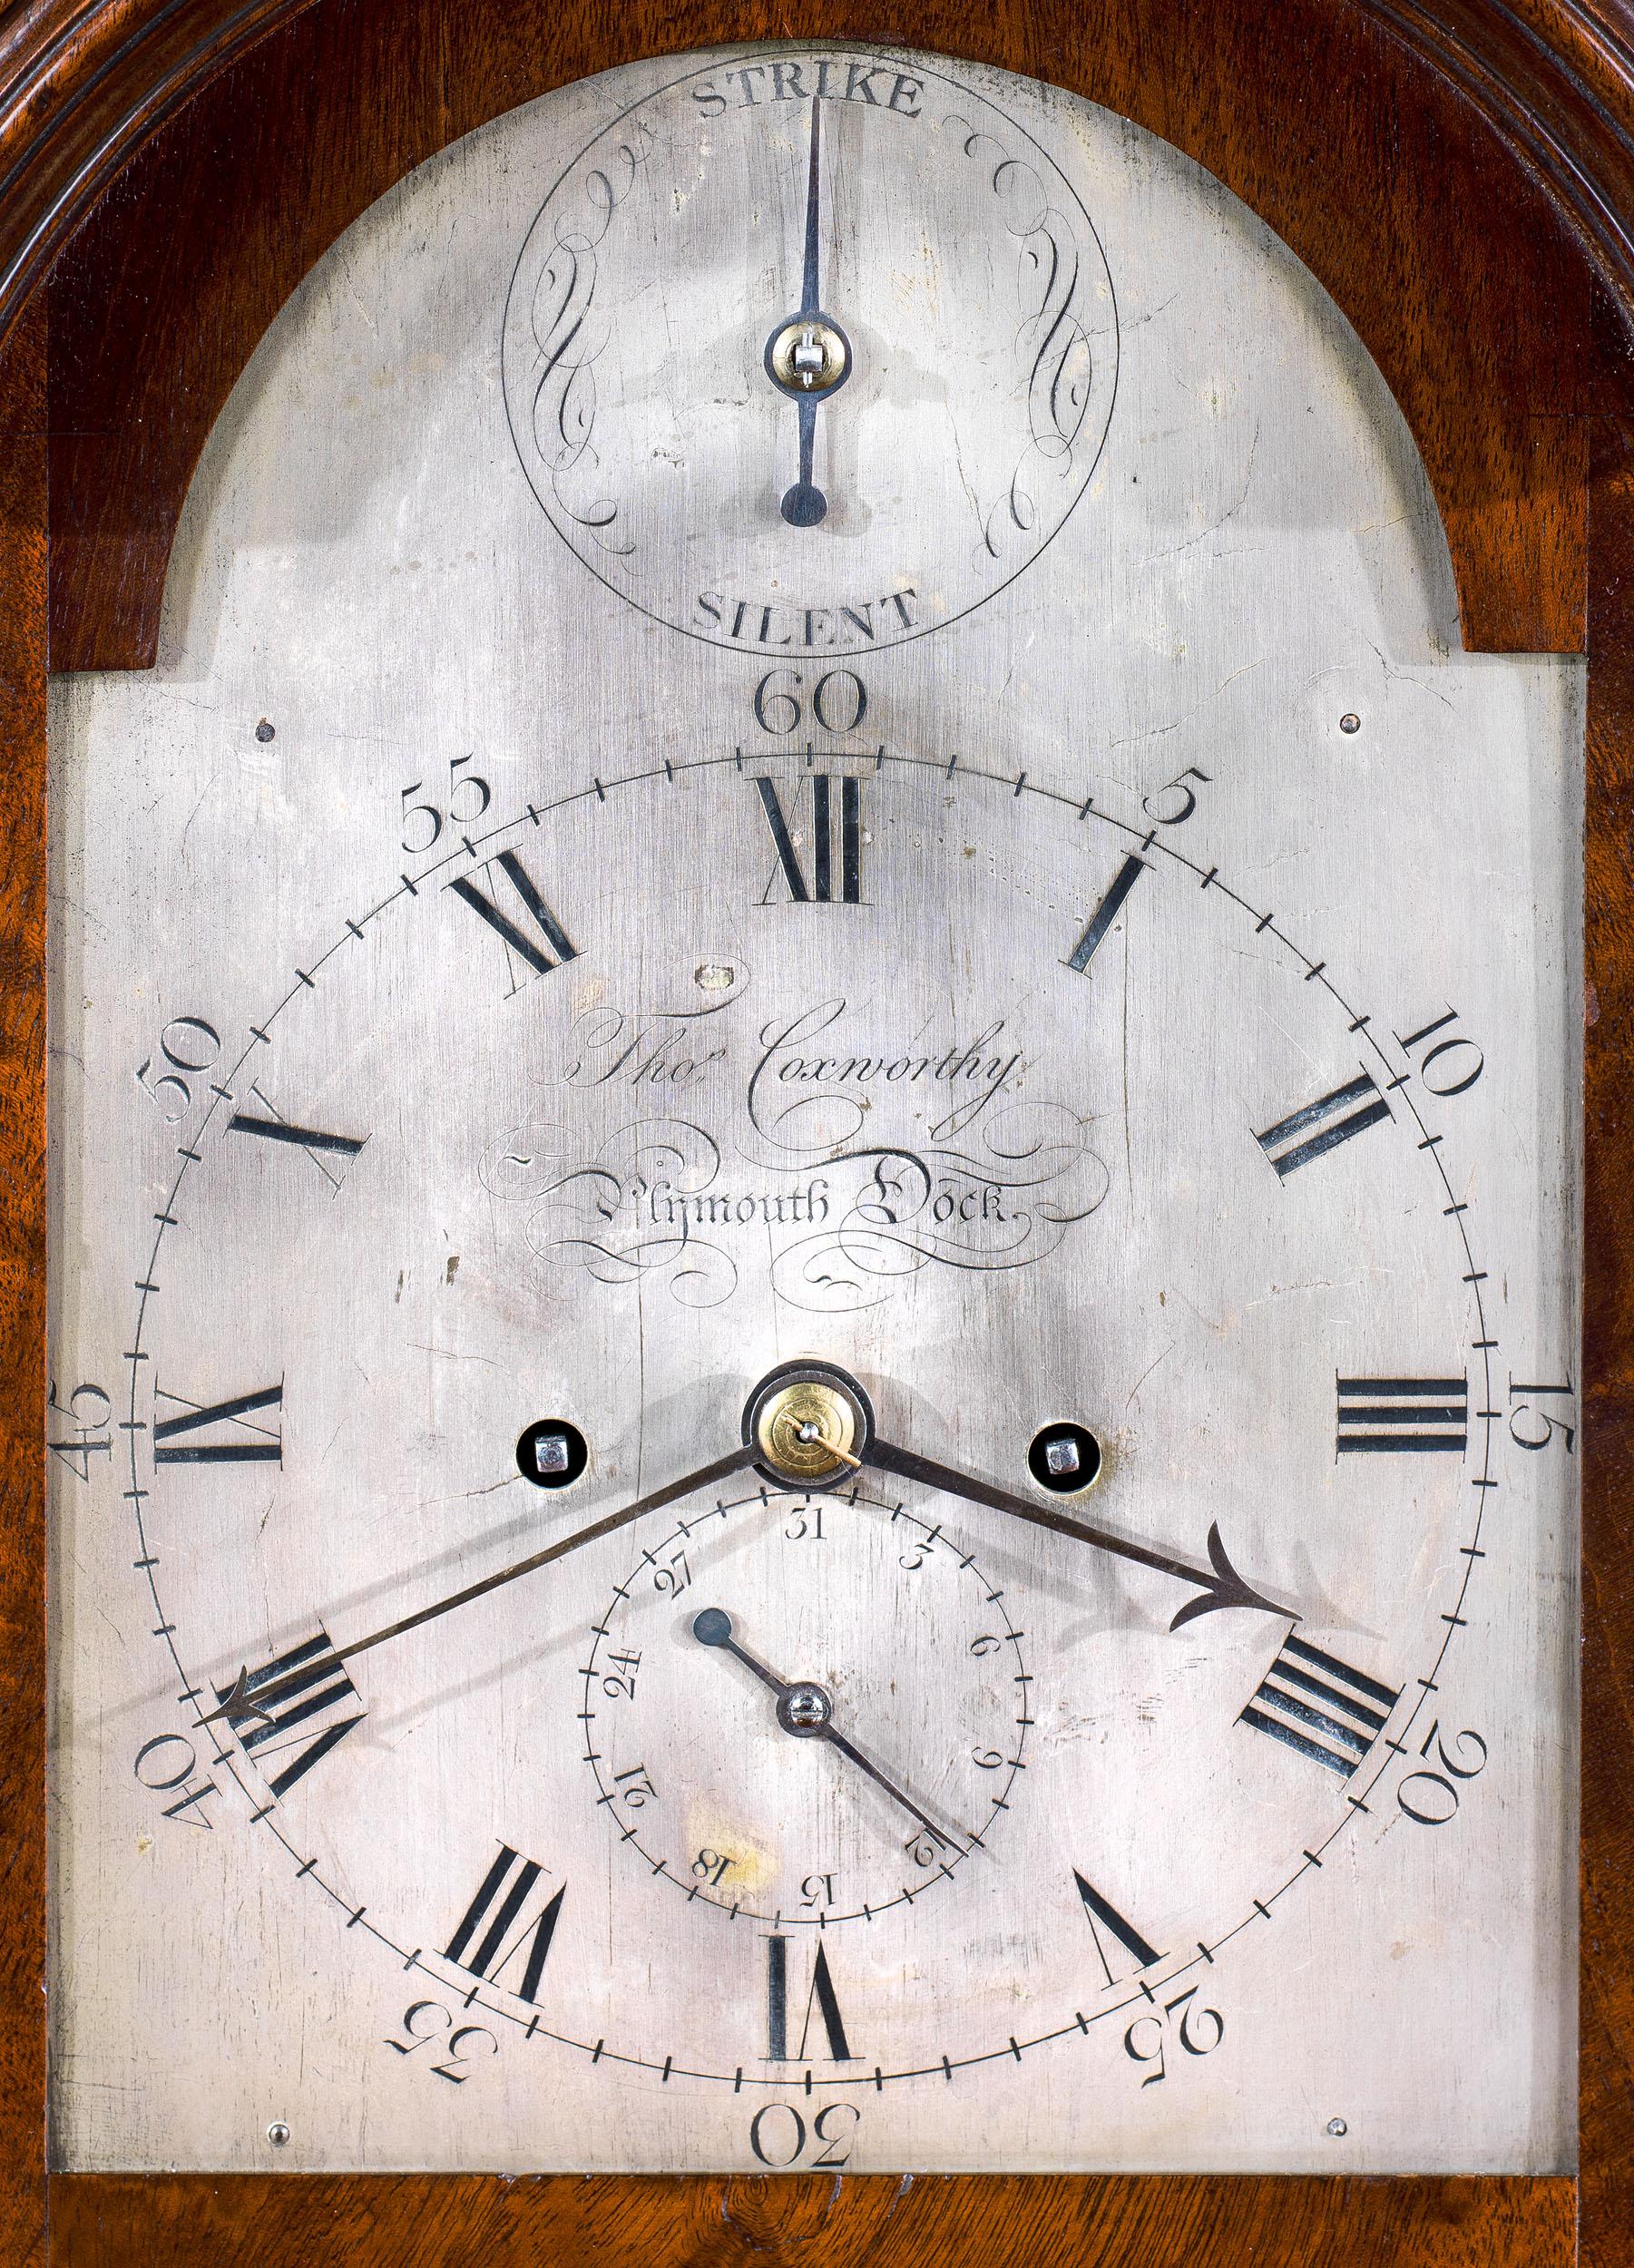 A fine 18th century eight day bracket or table clock by Thomas Coxworthy, with a brass bound flame mahogany veneered case and silvered dial. The arched silvered dial has both Roman and Arabic numerals, which at its centre has the smaller calendar